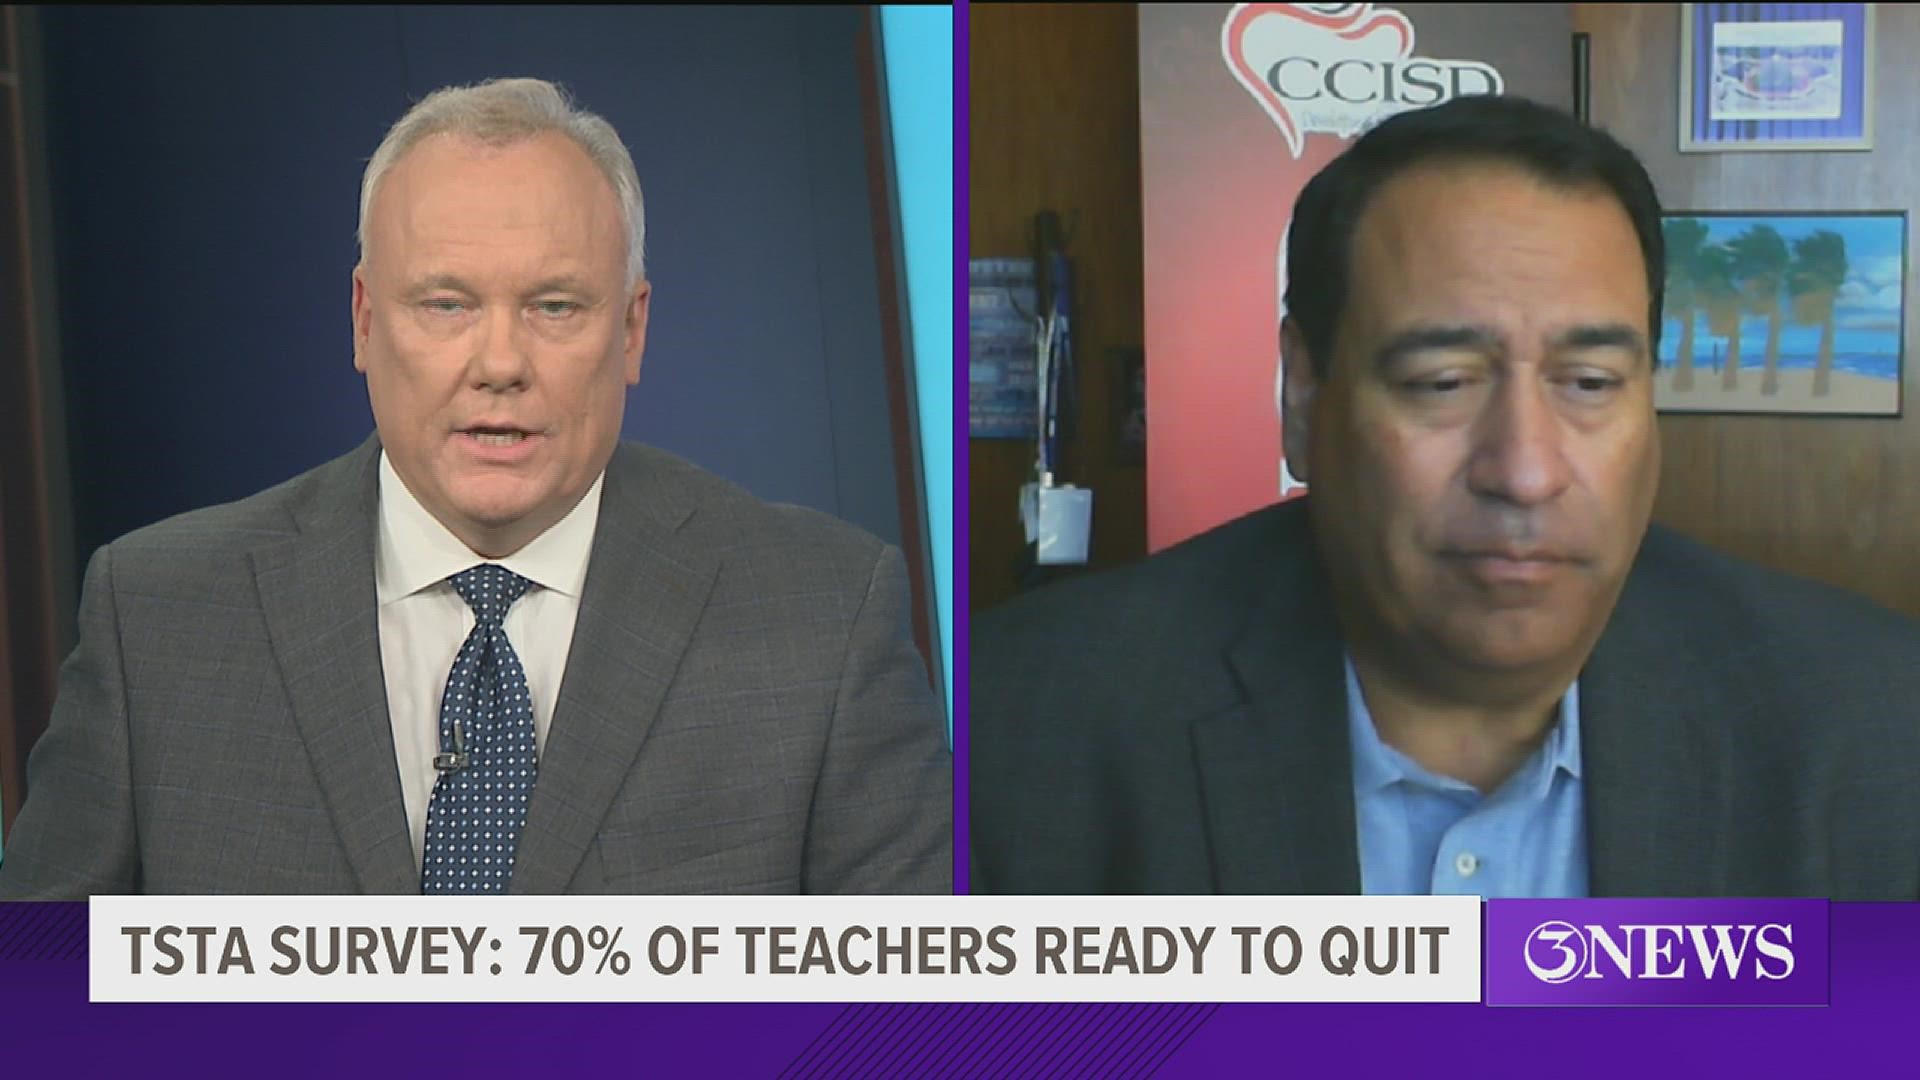 3NEWS got to speak with Hernandez regarding the progress that has been with the special task force he created to determine teacher retention goals.